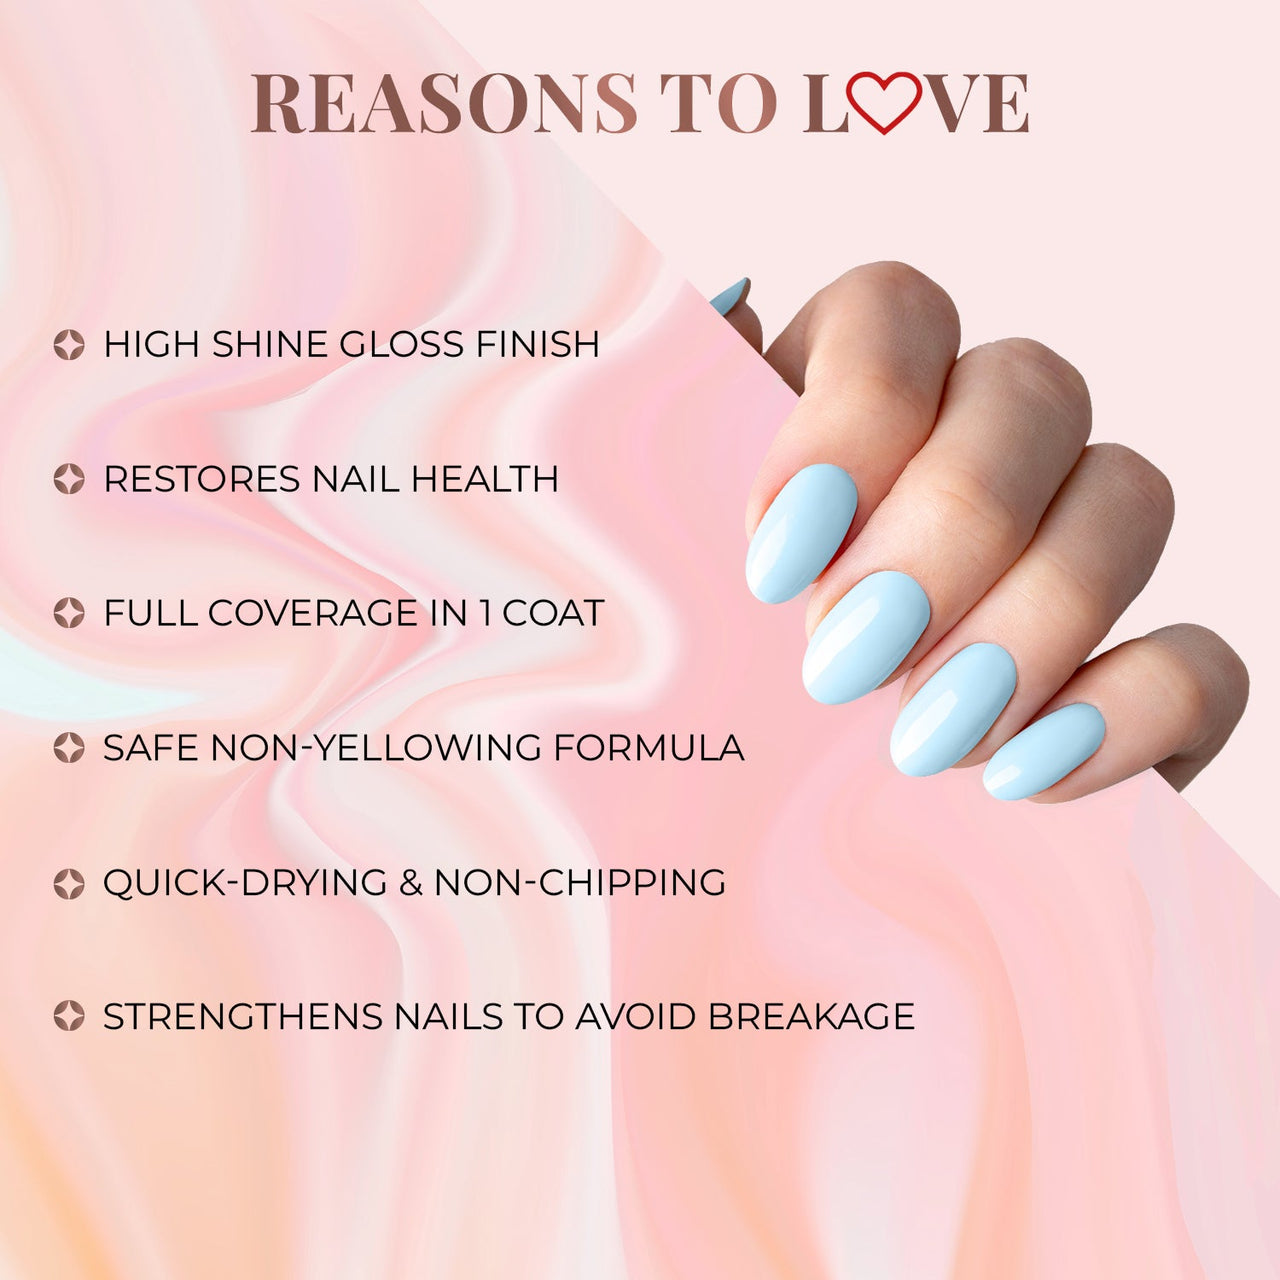 Are gel nails bad for you?